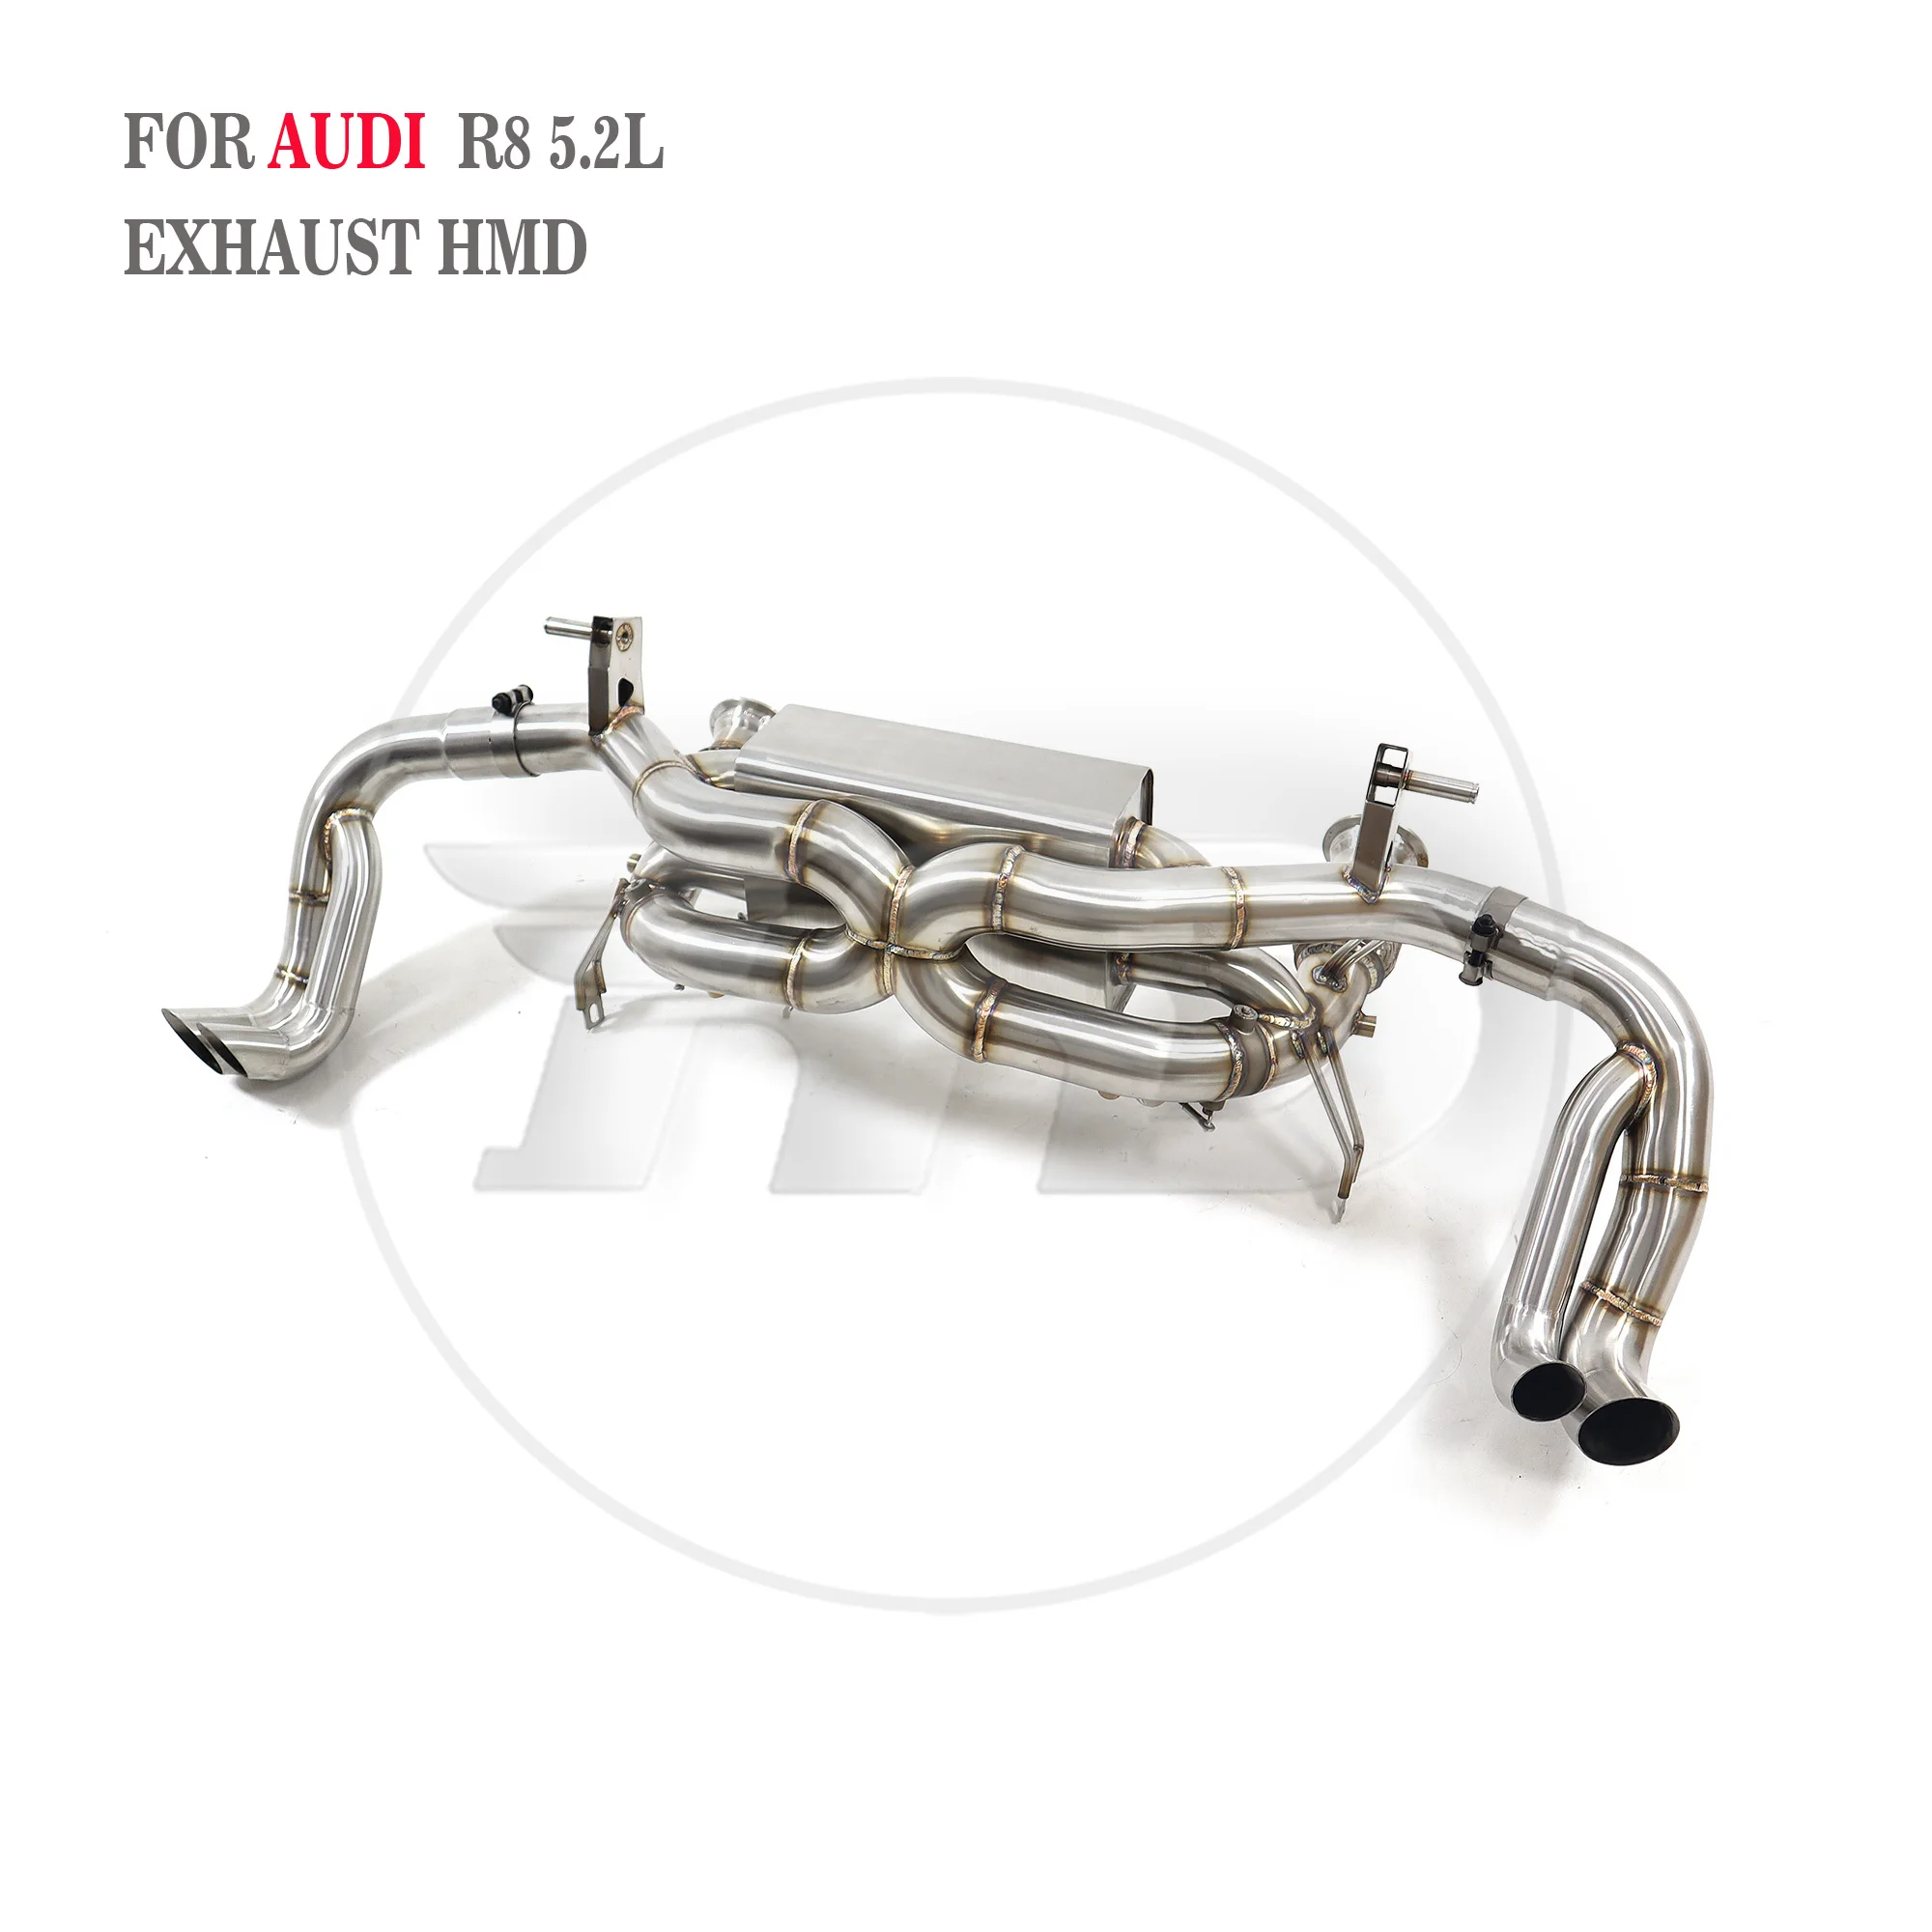 

HMD Stainless Steel Exhaust System for Audi R8 5.2L v10 4.2L v8 Auto Catback Modification Electronic Valve